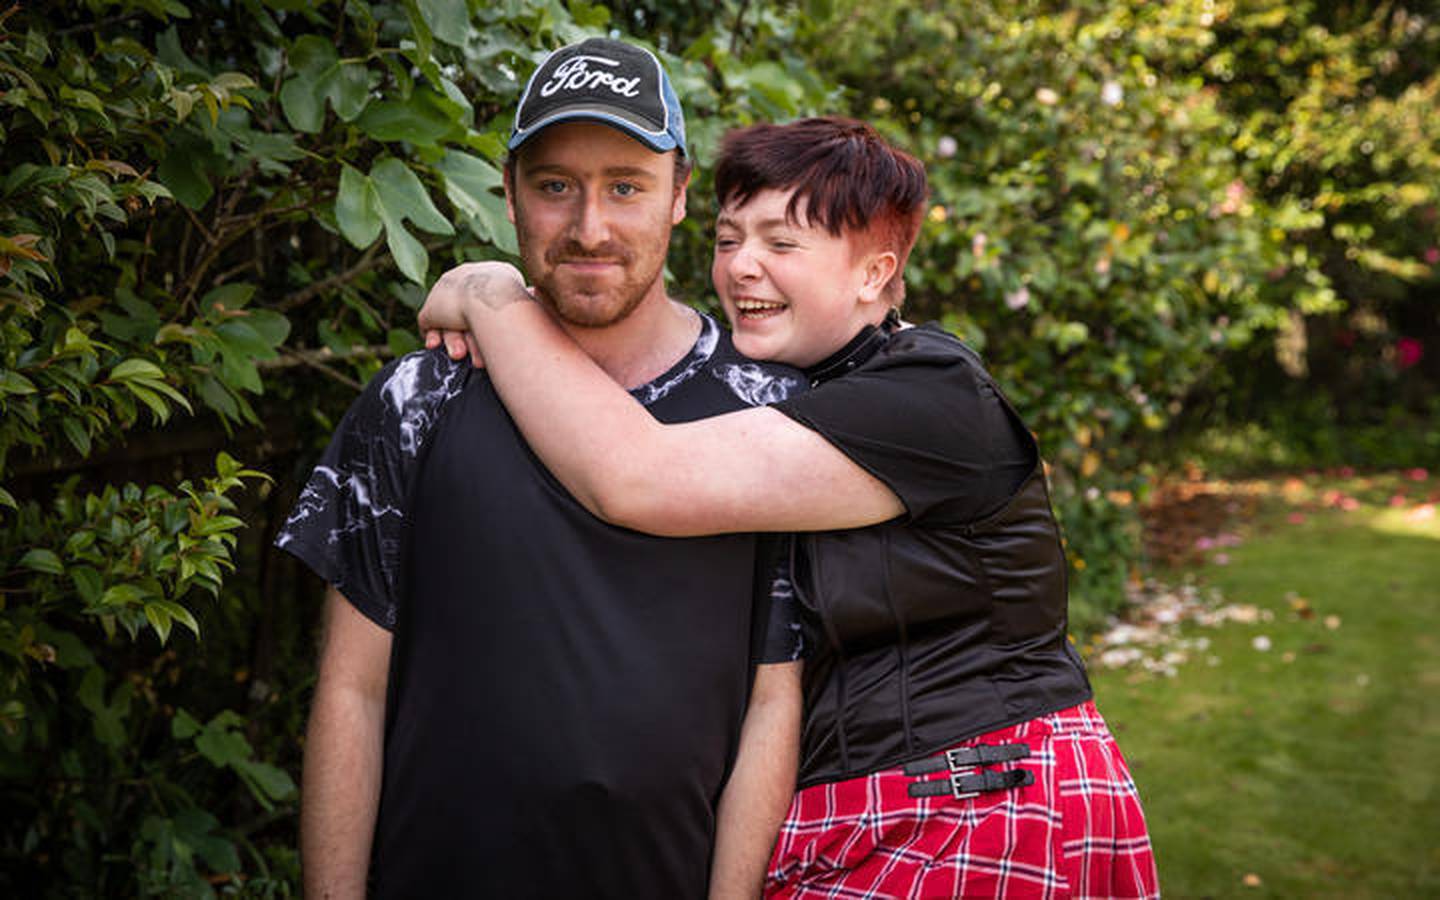 Michelle Shaw says her children, Jarrad and Scarlett (pictured), are also excited about their new status. Photo / RNZ, Nate McKinnon